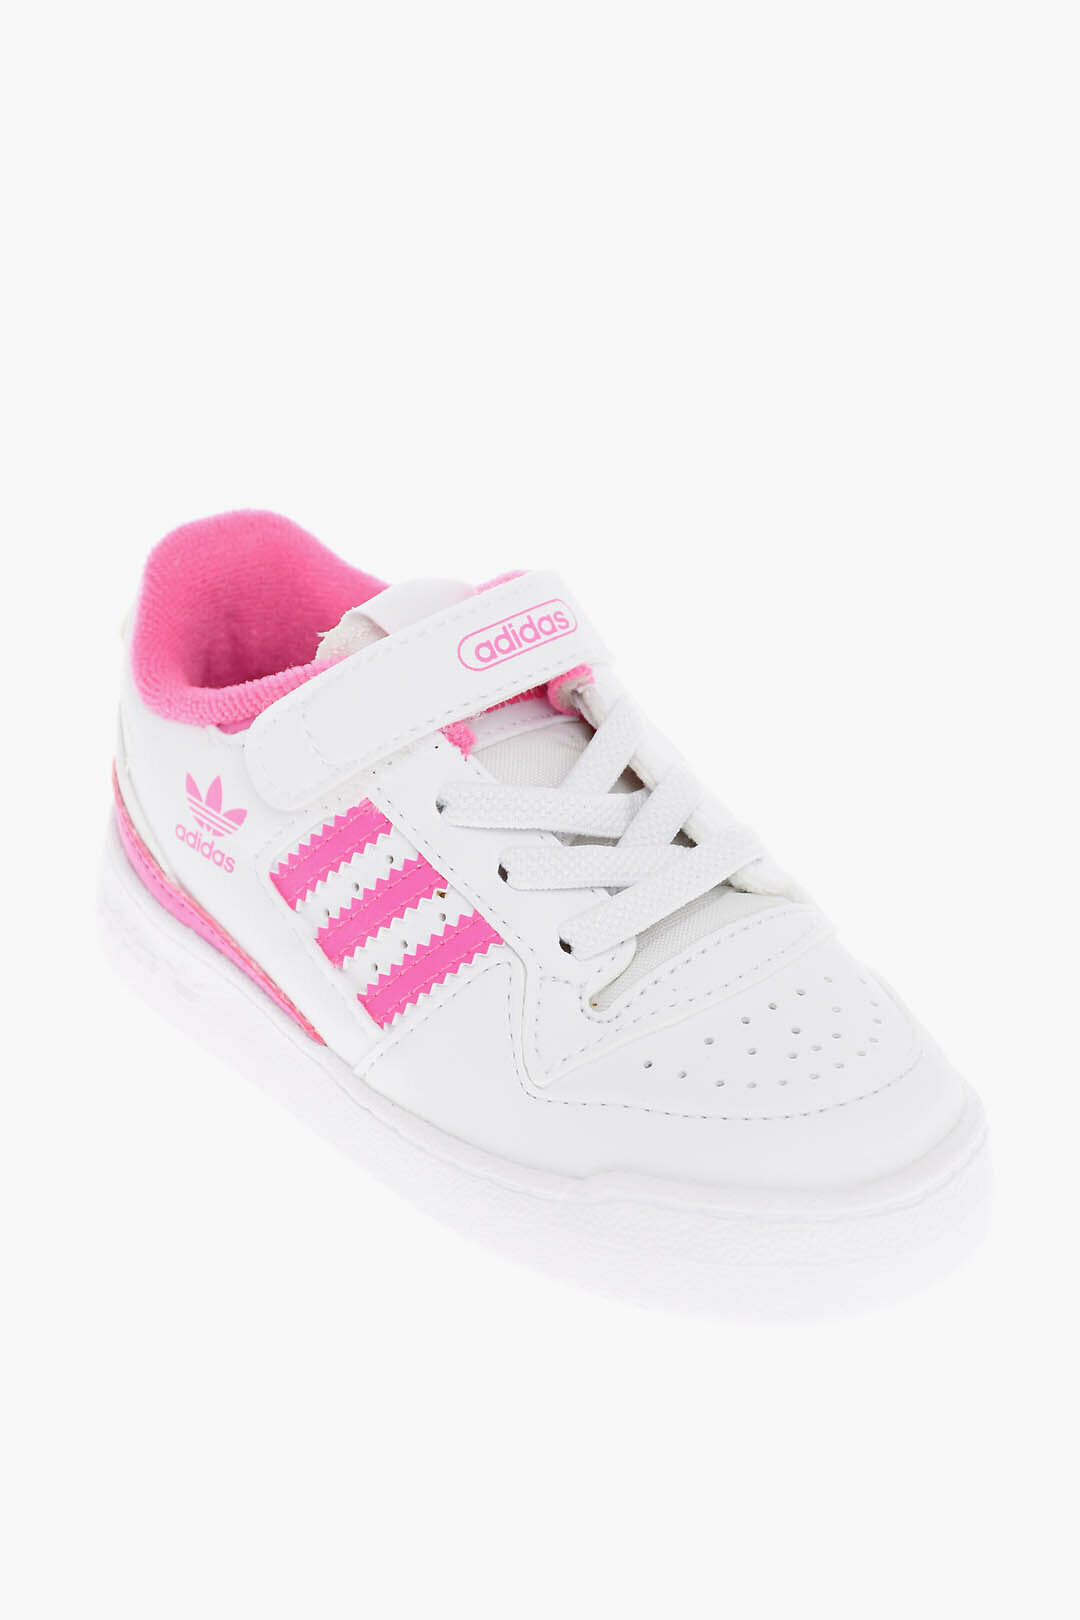 Adidas Kids FORUM I Lace-up Sneakers with Logo Print girls - Glamood Outlet